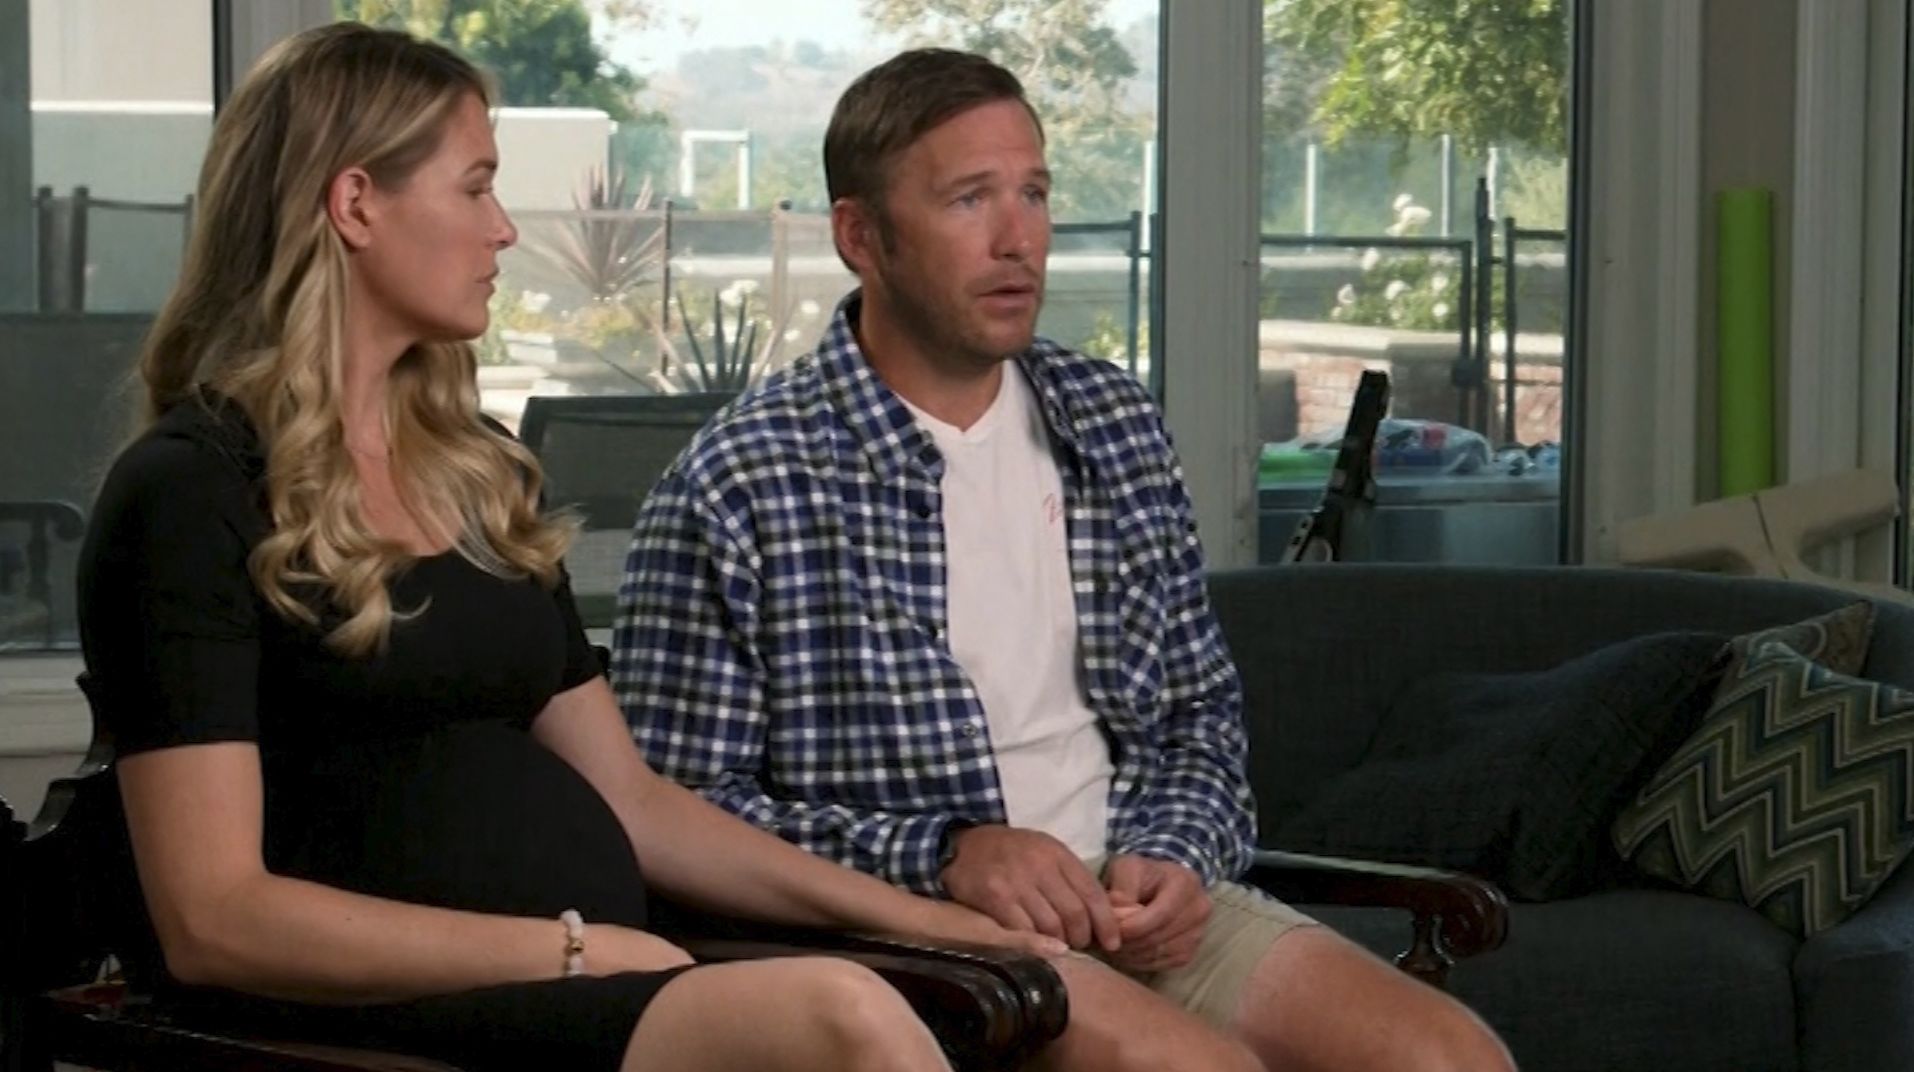 Bode Miller, Morgan Miller share 'incredible' home birth story of twins  Asher and Aksel